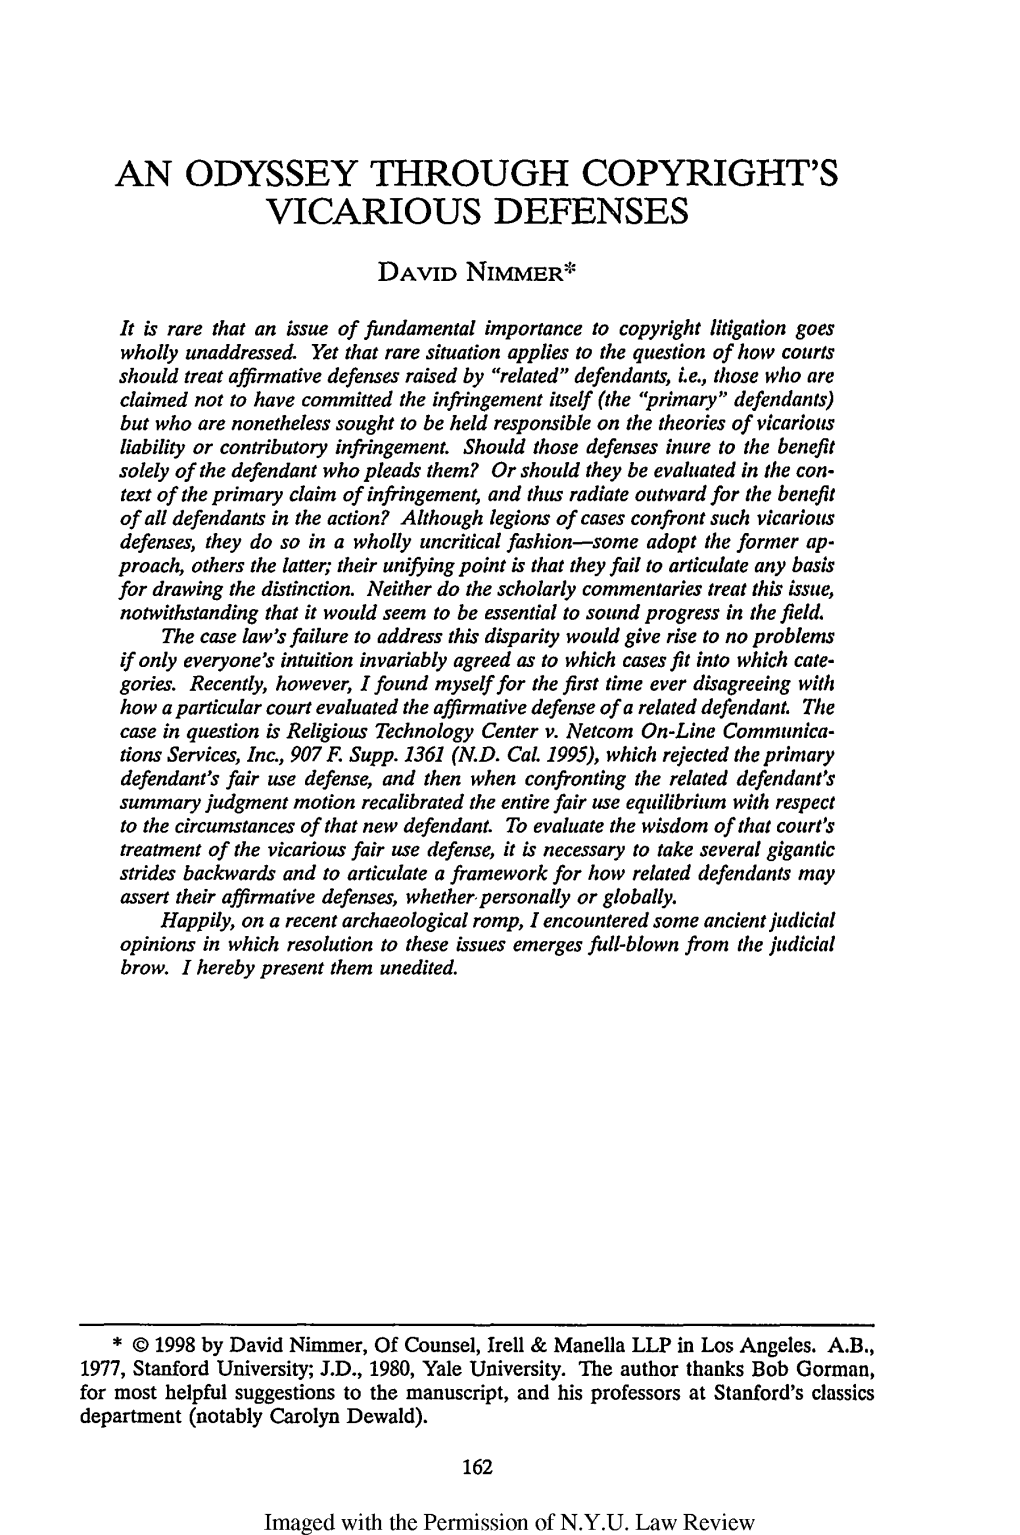 David Nimmer in the NYU Law Review